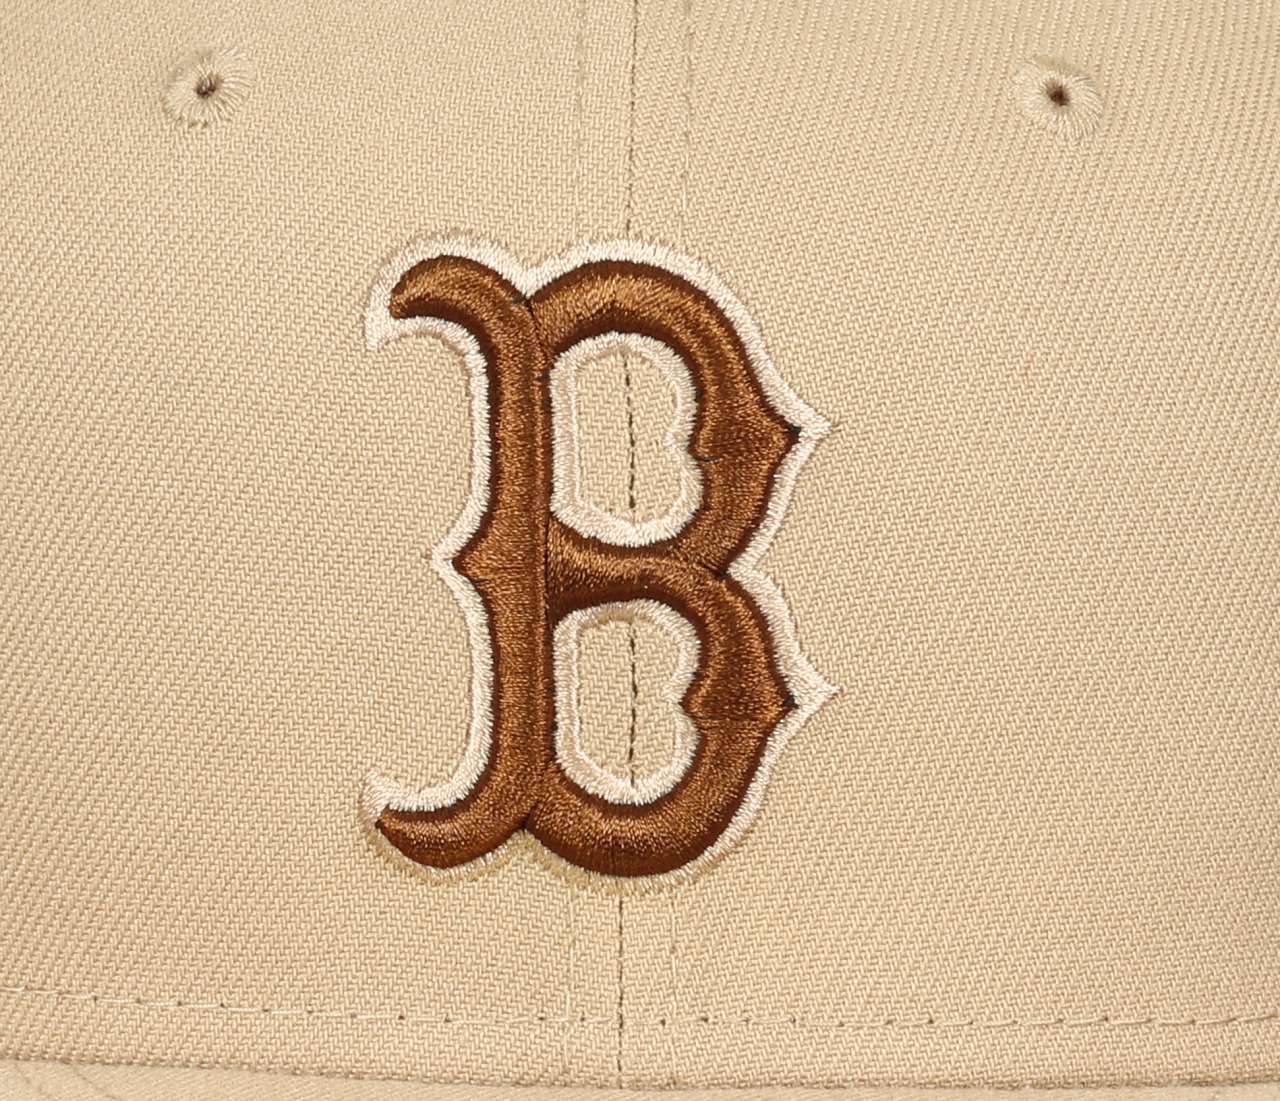 Boston Red Sox  MLB World Series 2018 Sidepatch Beige 59Fifty Basecap New Era